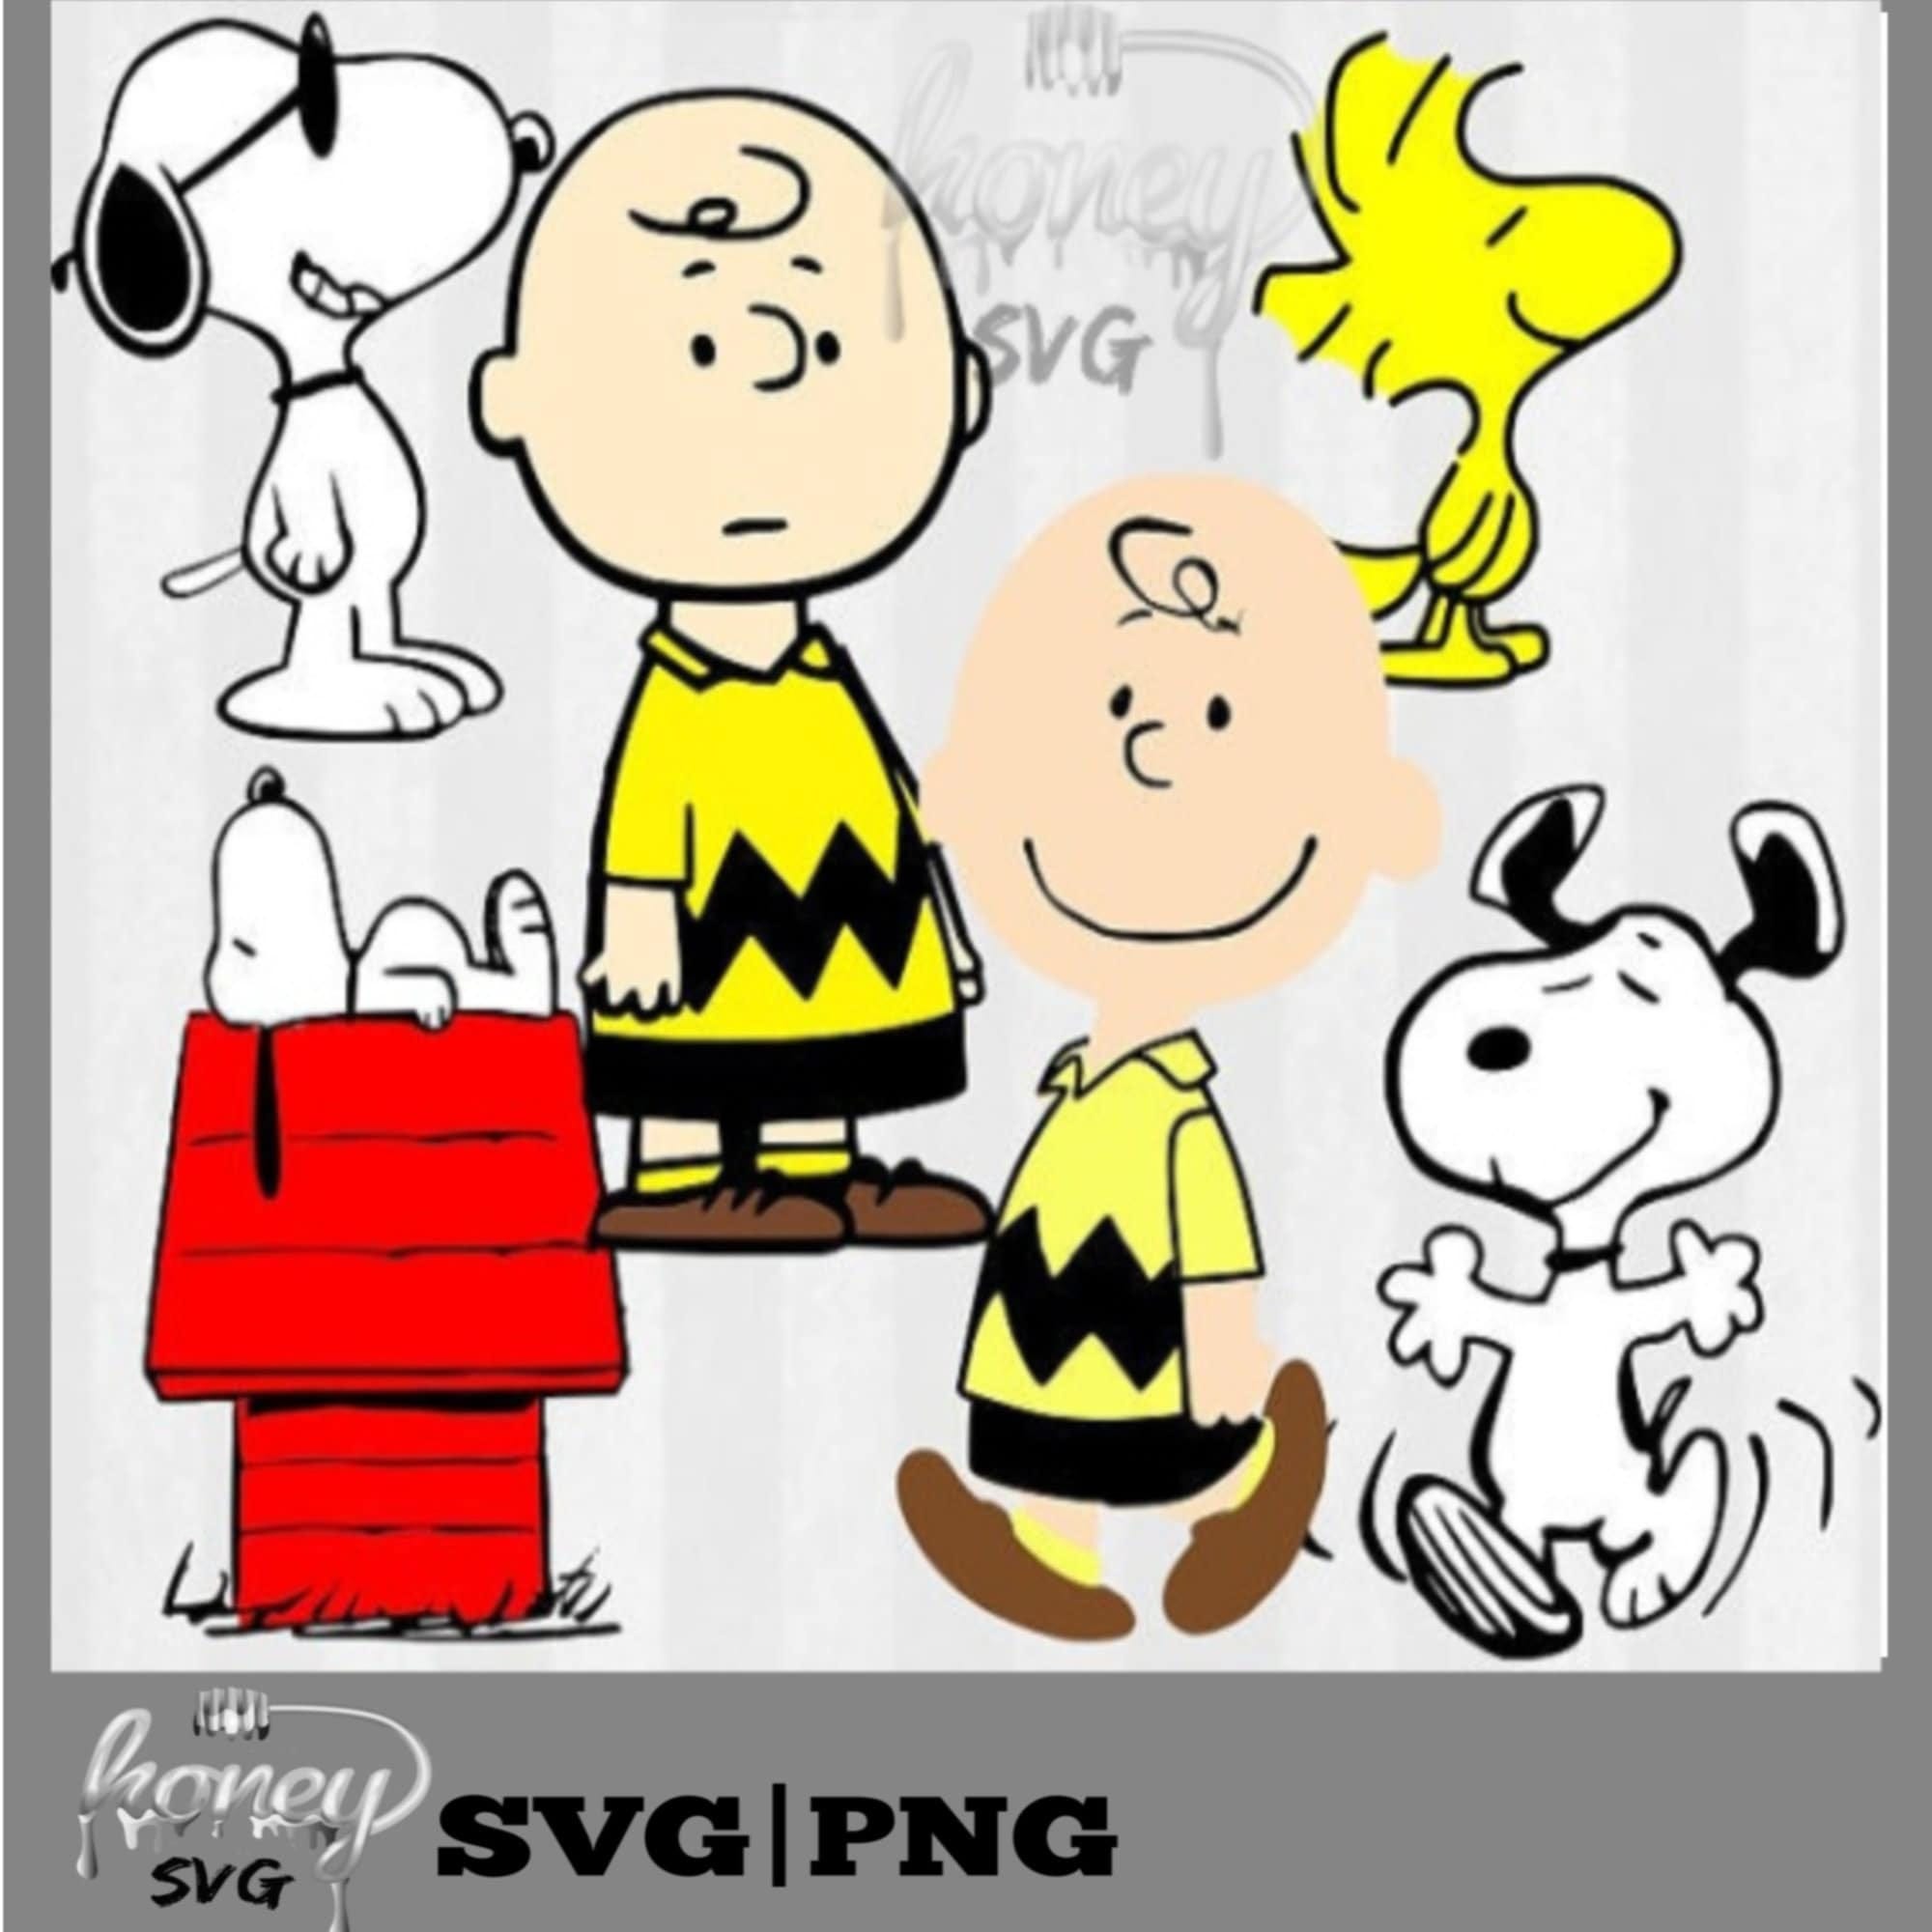 Charlie Brown SVG, Charlie Brown Clip Art, Peanuts Digital Download for Silhouette Cameo or Cricut, Snoopy SVG, vector, clipart, svg files